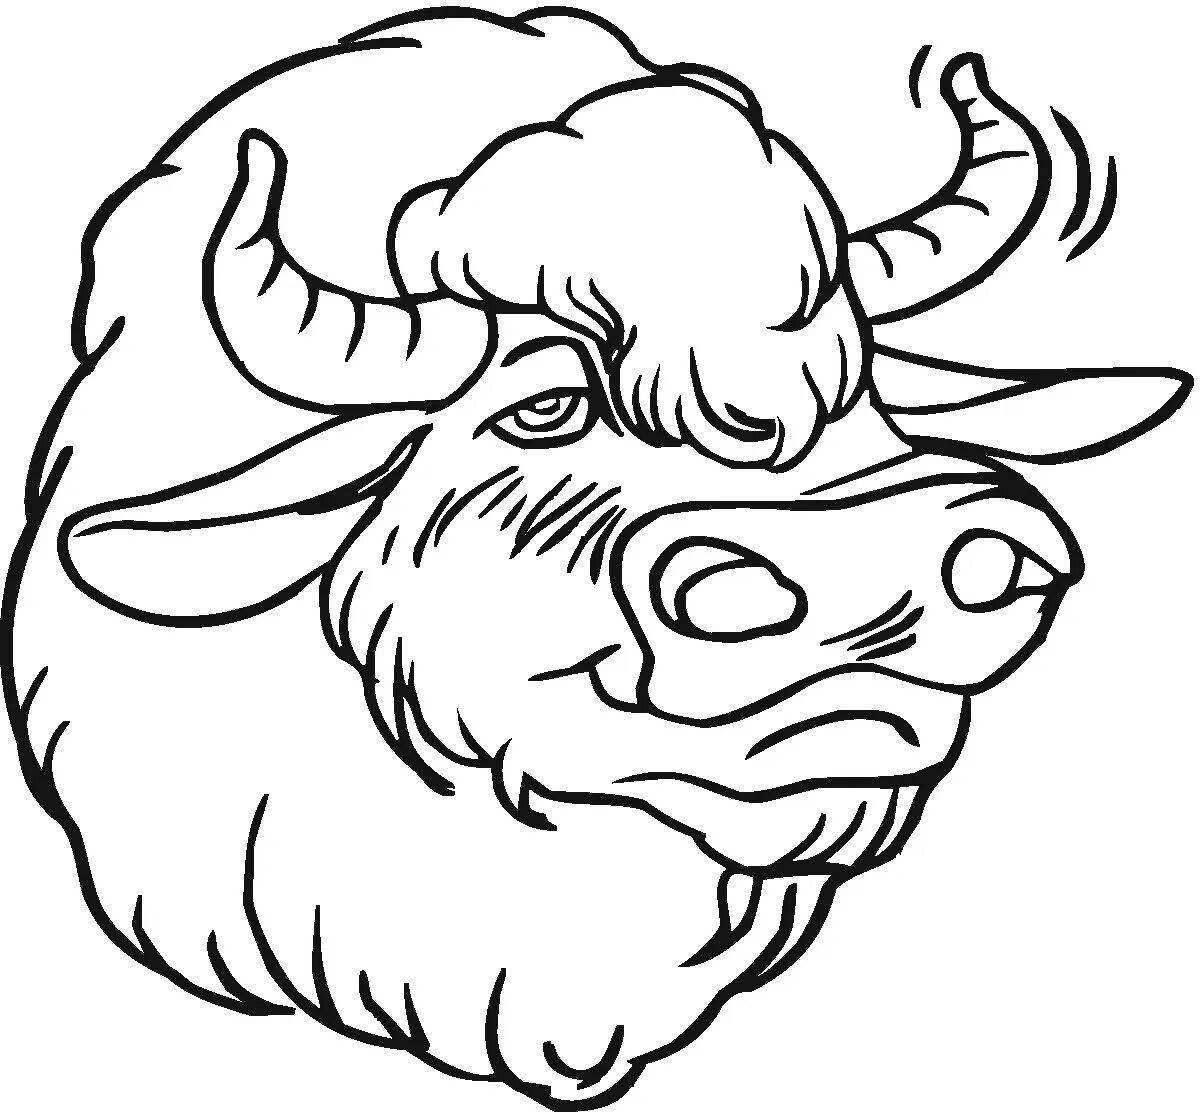 Awesome bison coloring pages for kids